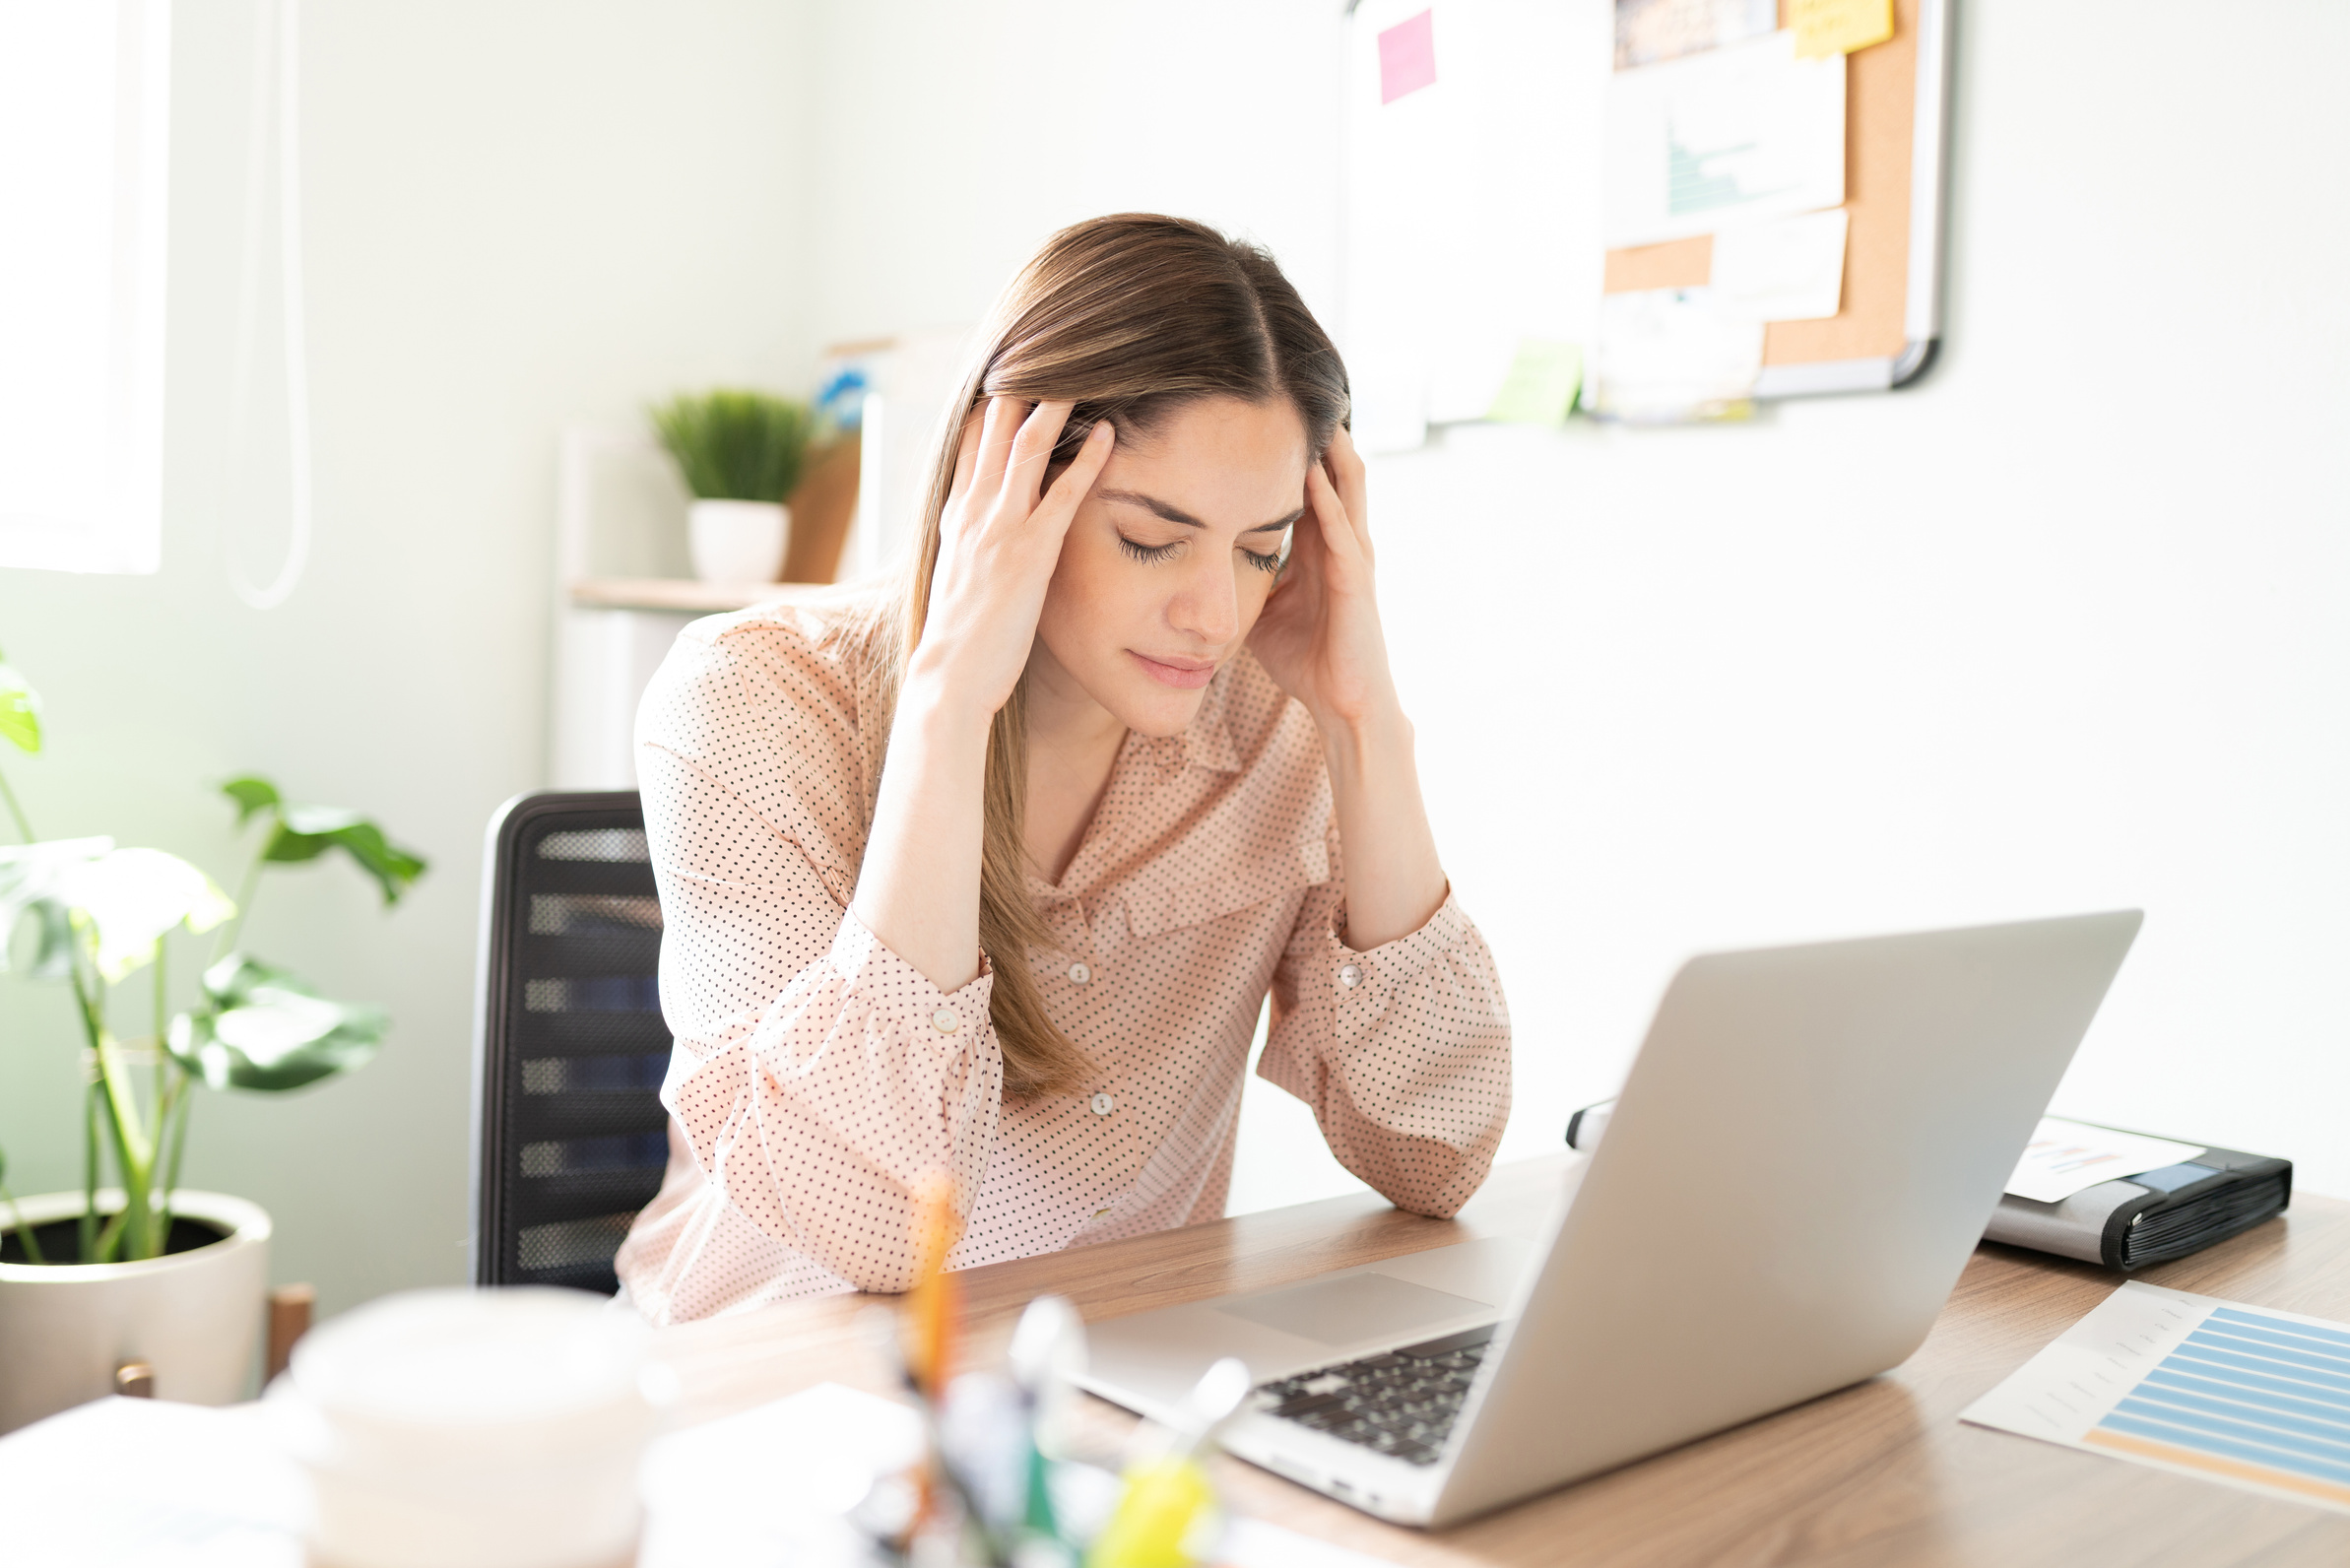 Stressed and overwhelmed woman at work